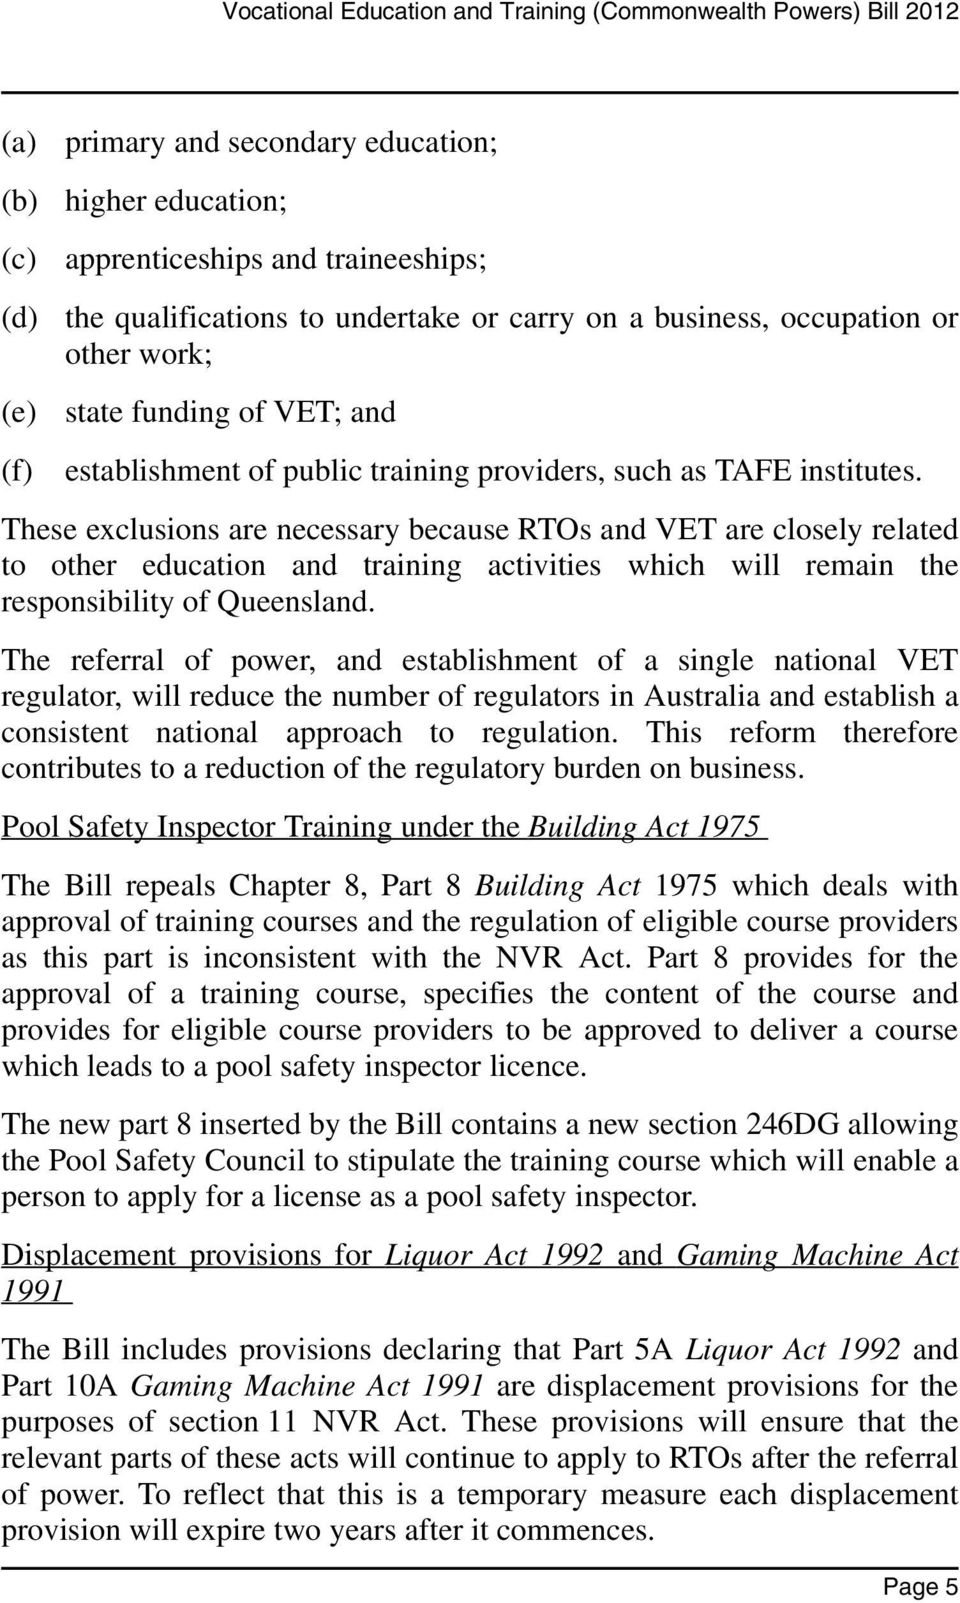 These exclusions are necessary because RTOs and VET are closely related to other education and training activities which will remain the responsibility of Queensland.